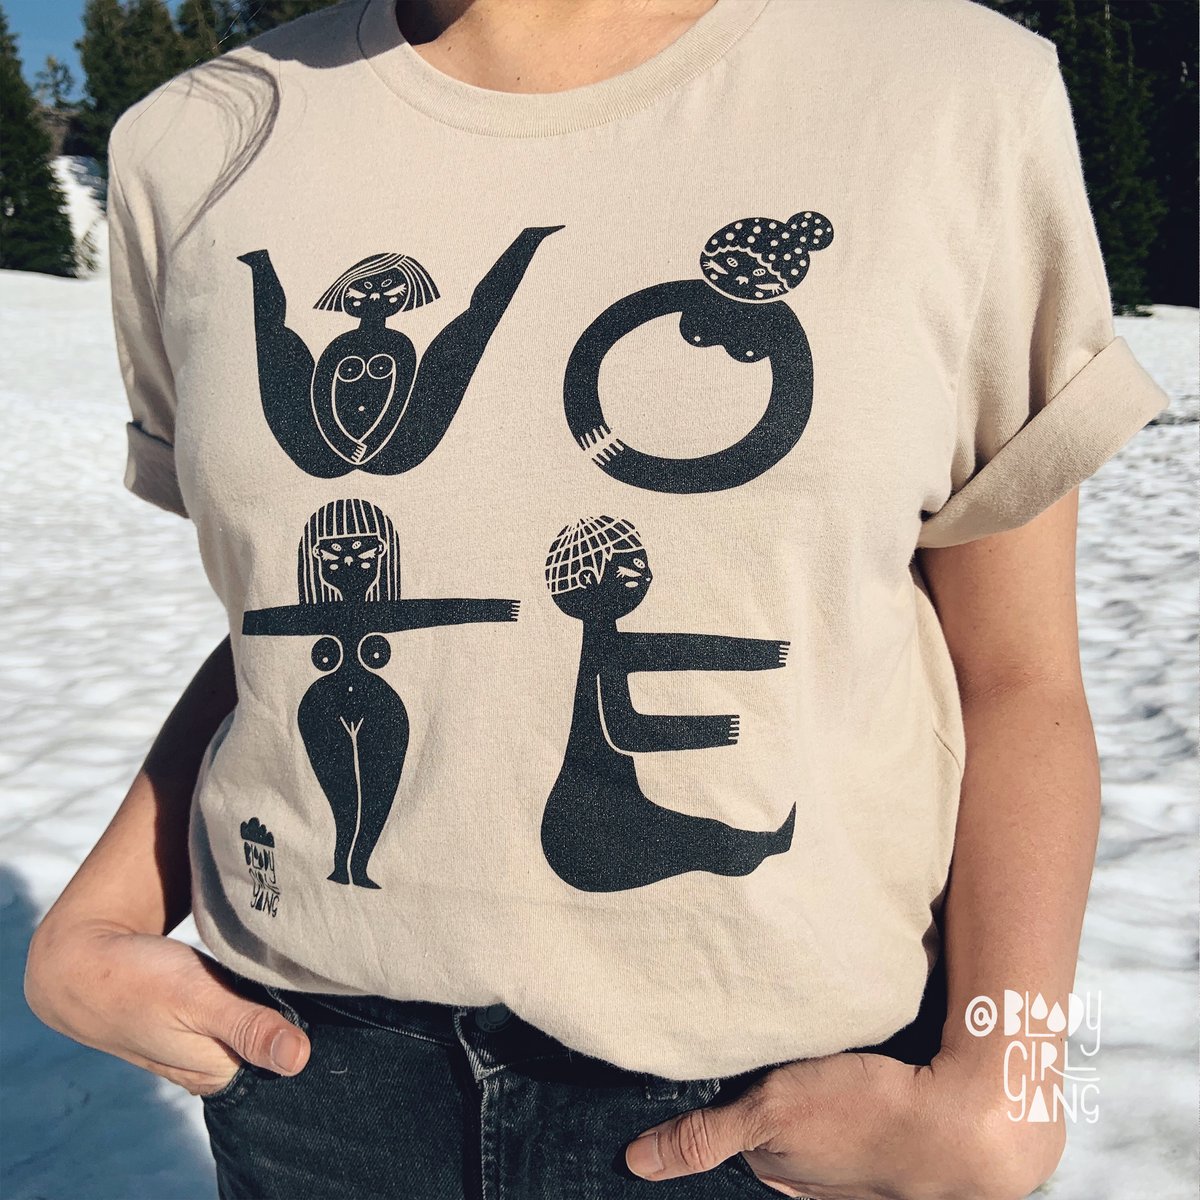 A shirt with the letters L O V E printed on it.